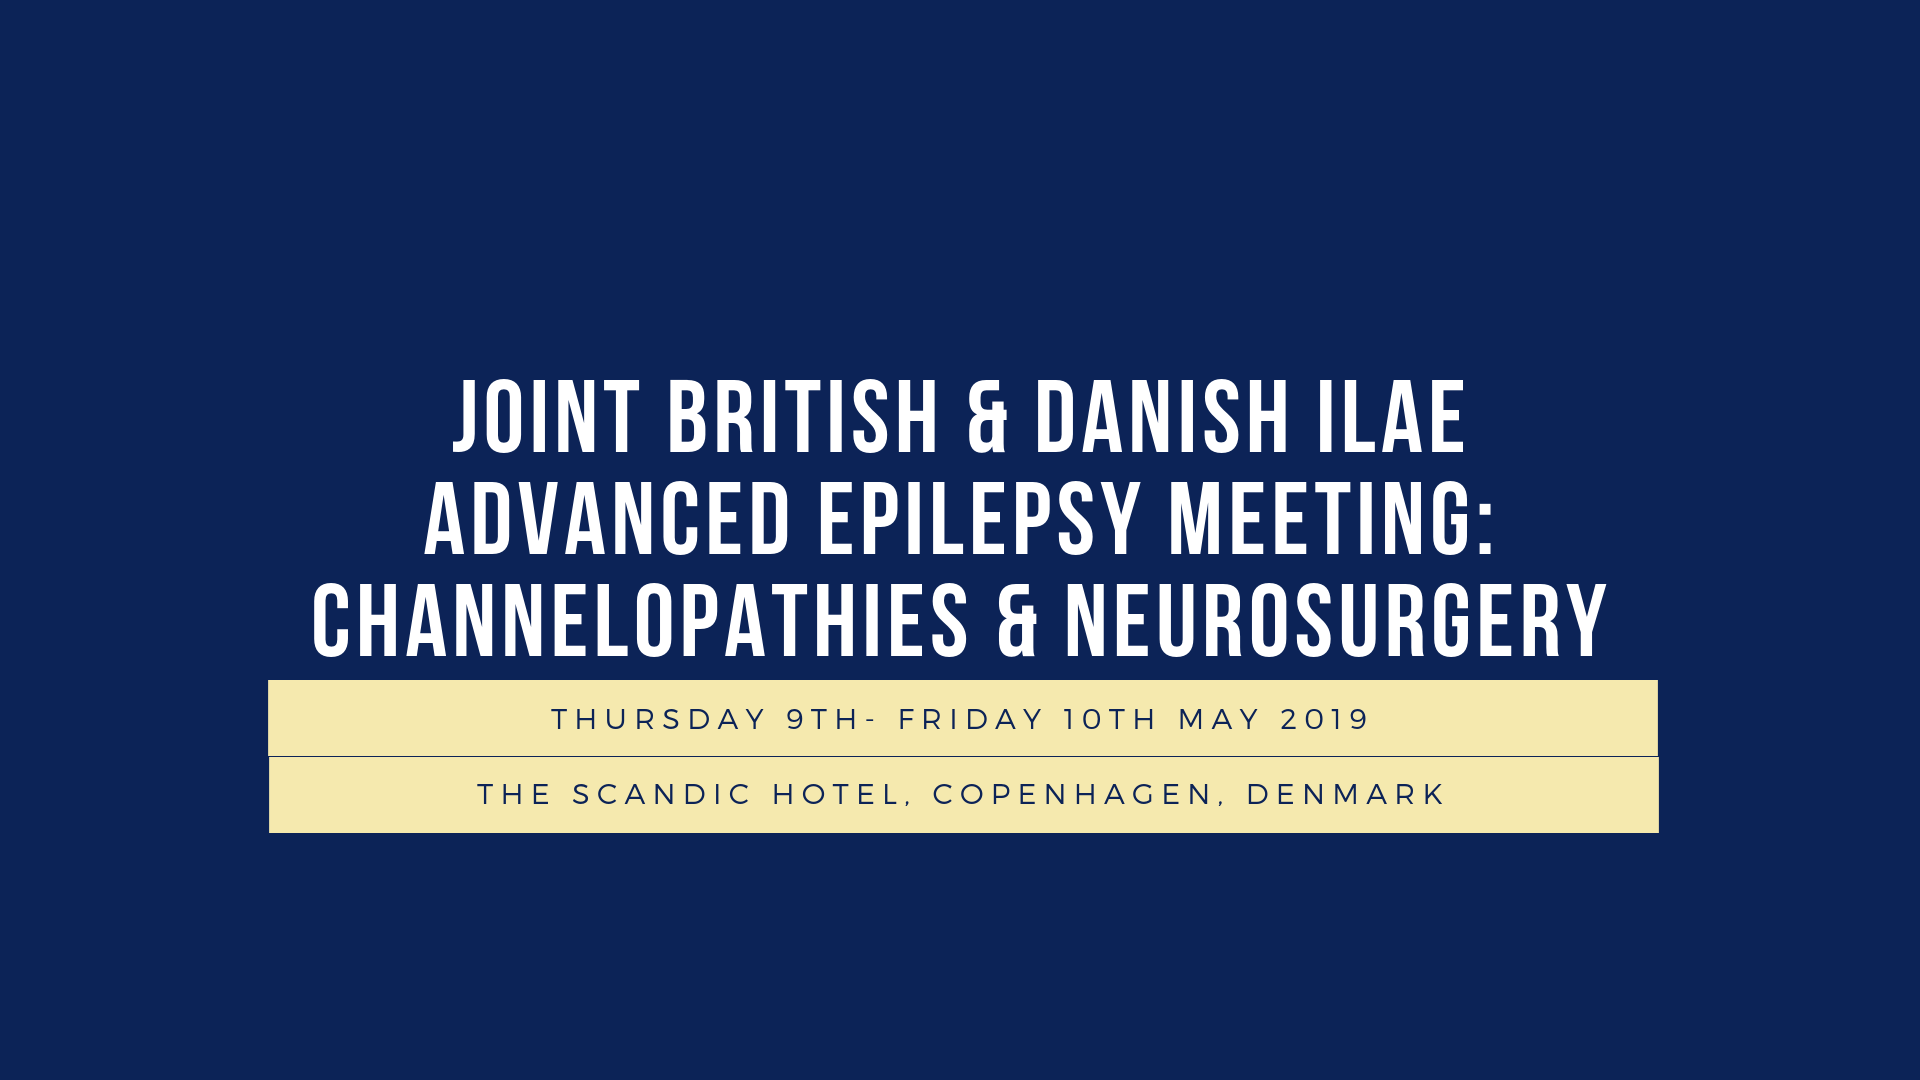 Joint British and Danish ILAE Advanced Epilepsy Meeting: Channelopathies and Neurosurgery